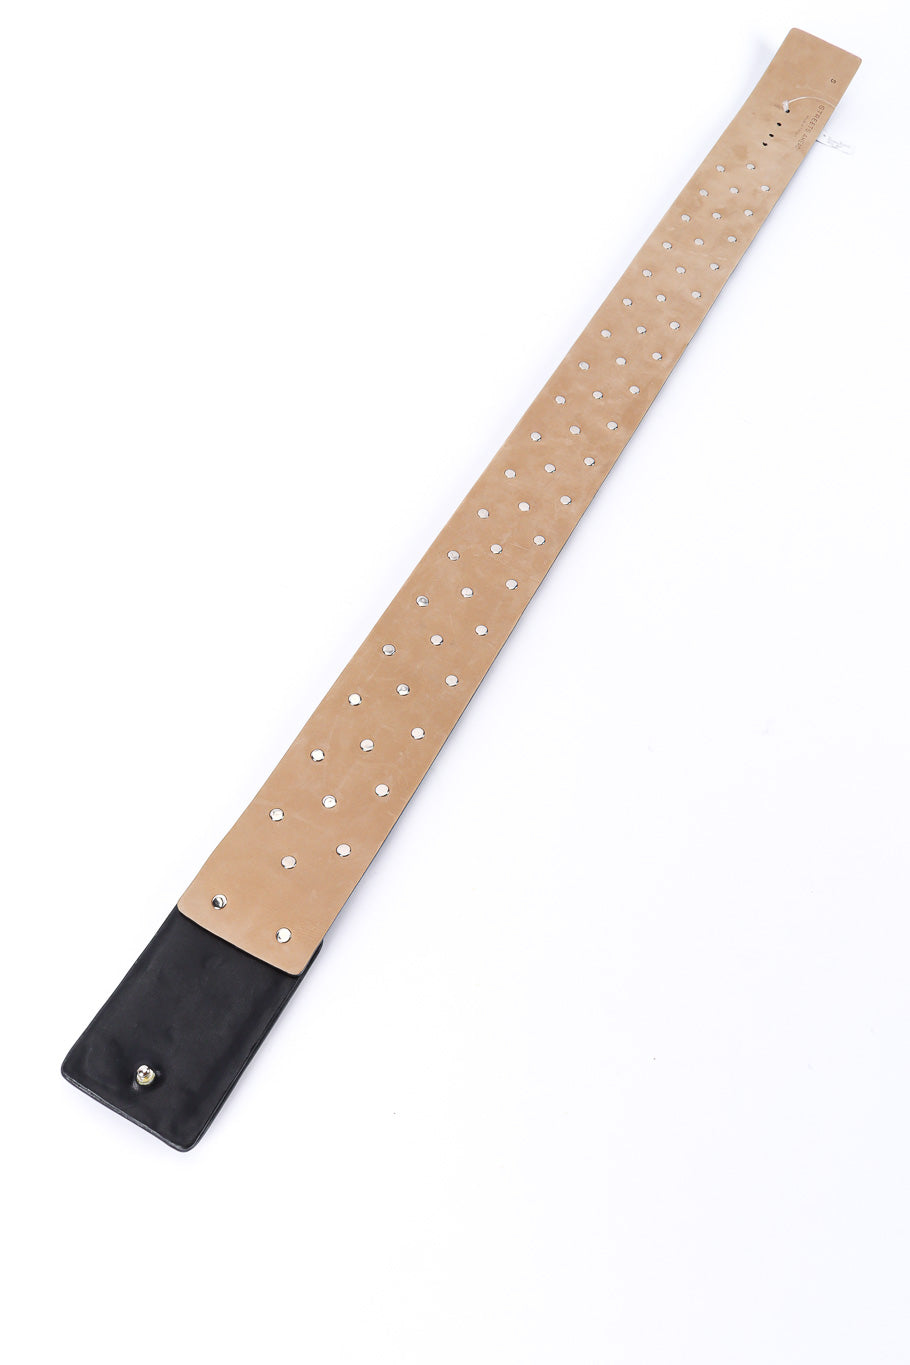 Studded leather statement belt by Streets Ahead straight flat lay inside @recessla